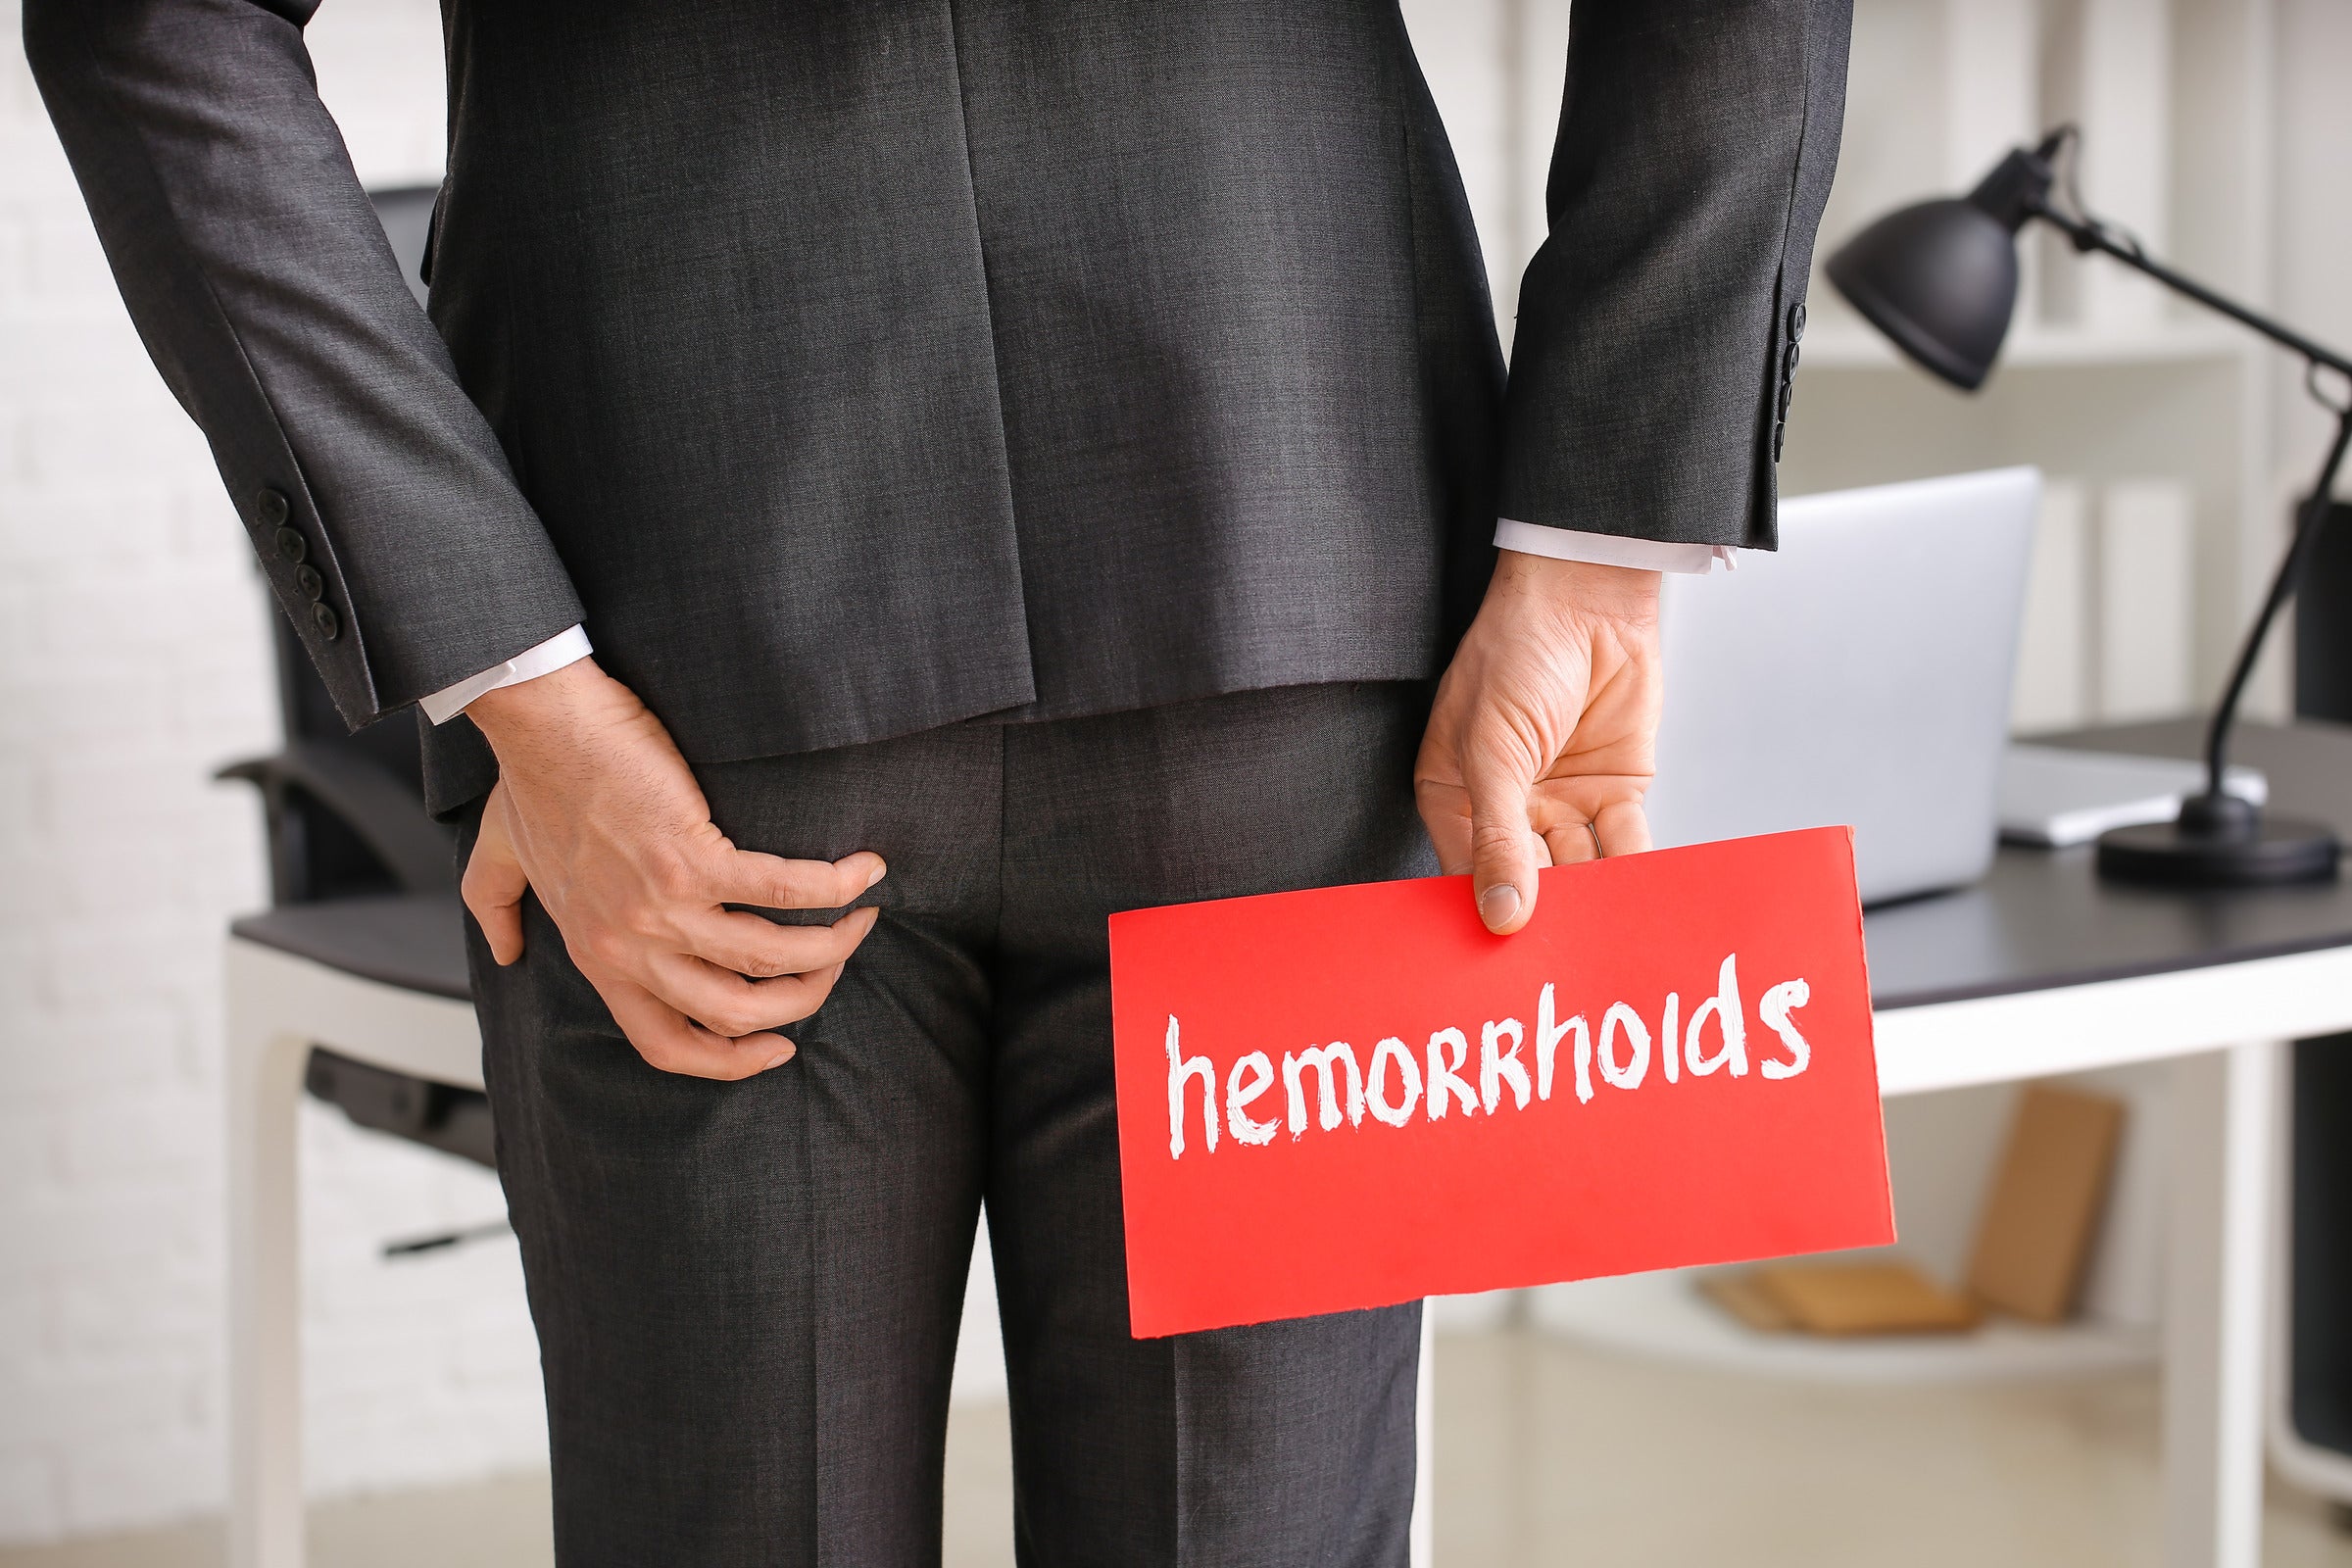 Taking care of hemorrhoids at meetings & events